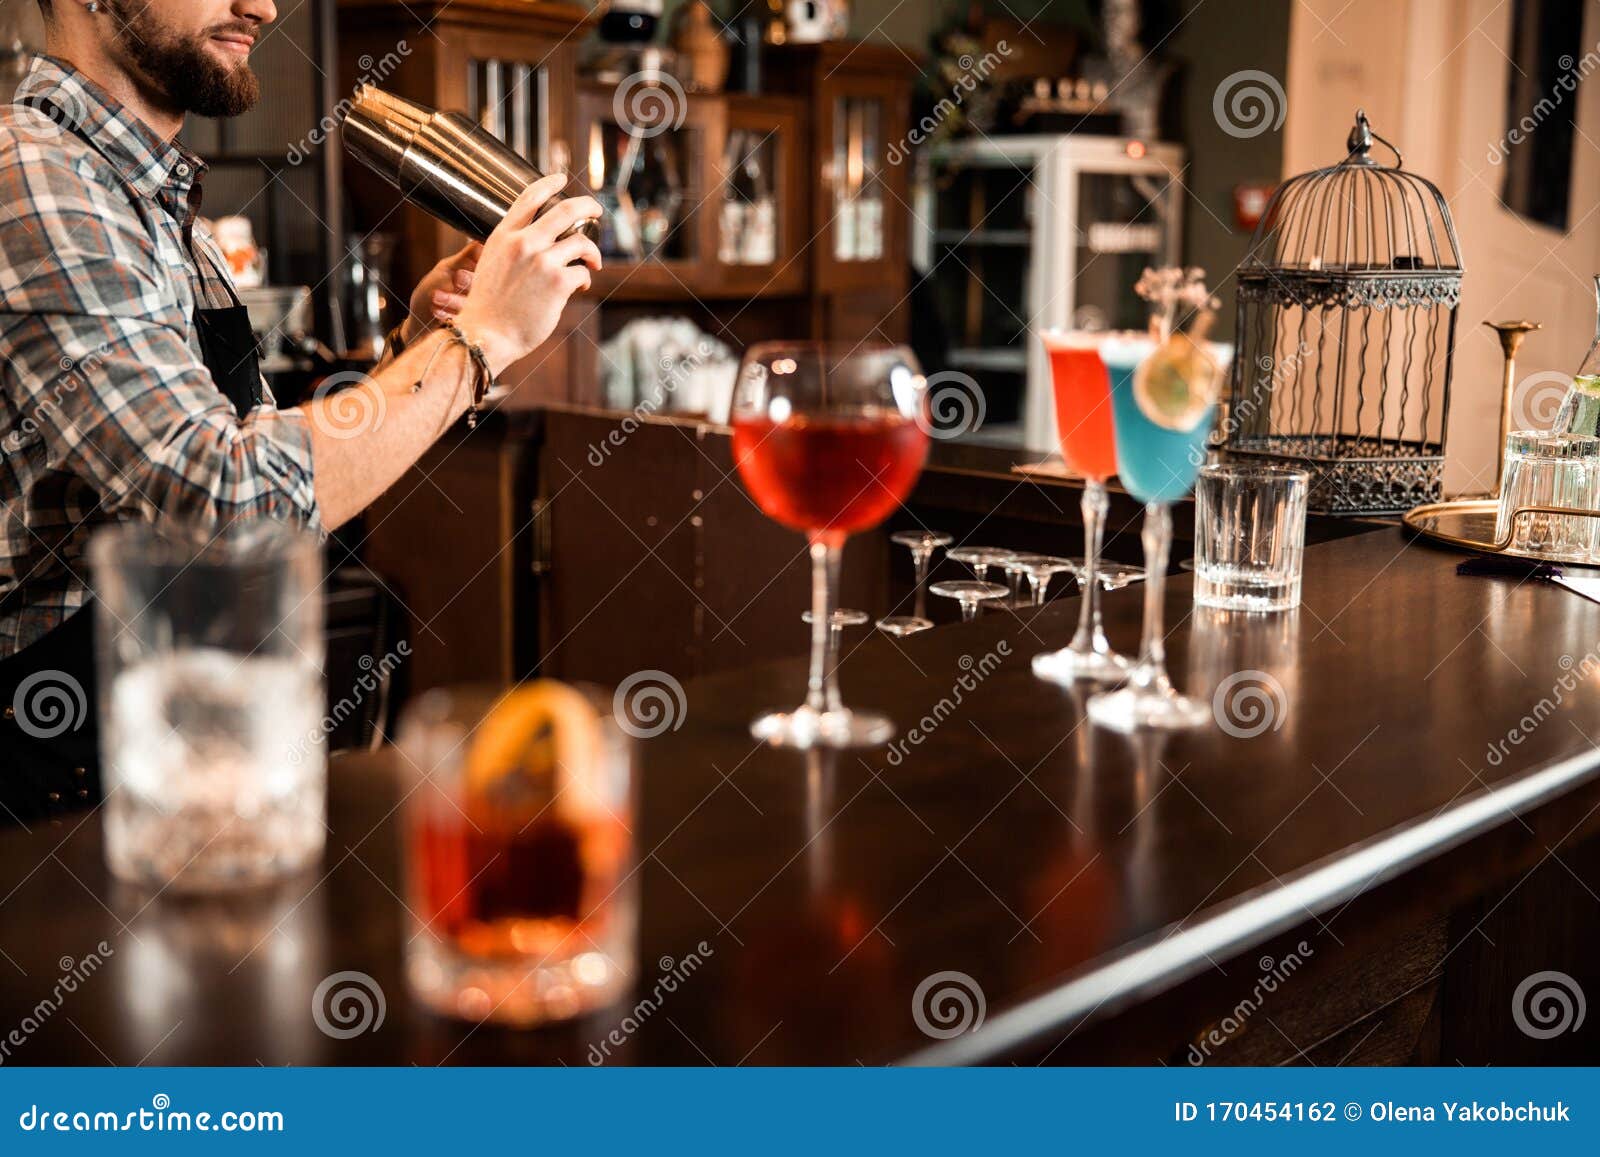 Bartender is Mixing a Summer Cocktail Stock Photo - Image of cocktail